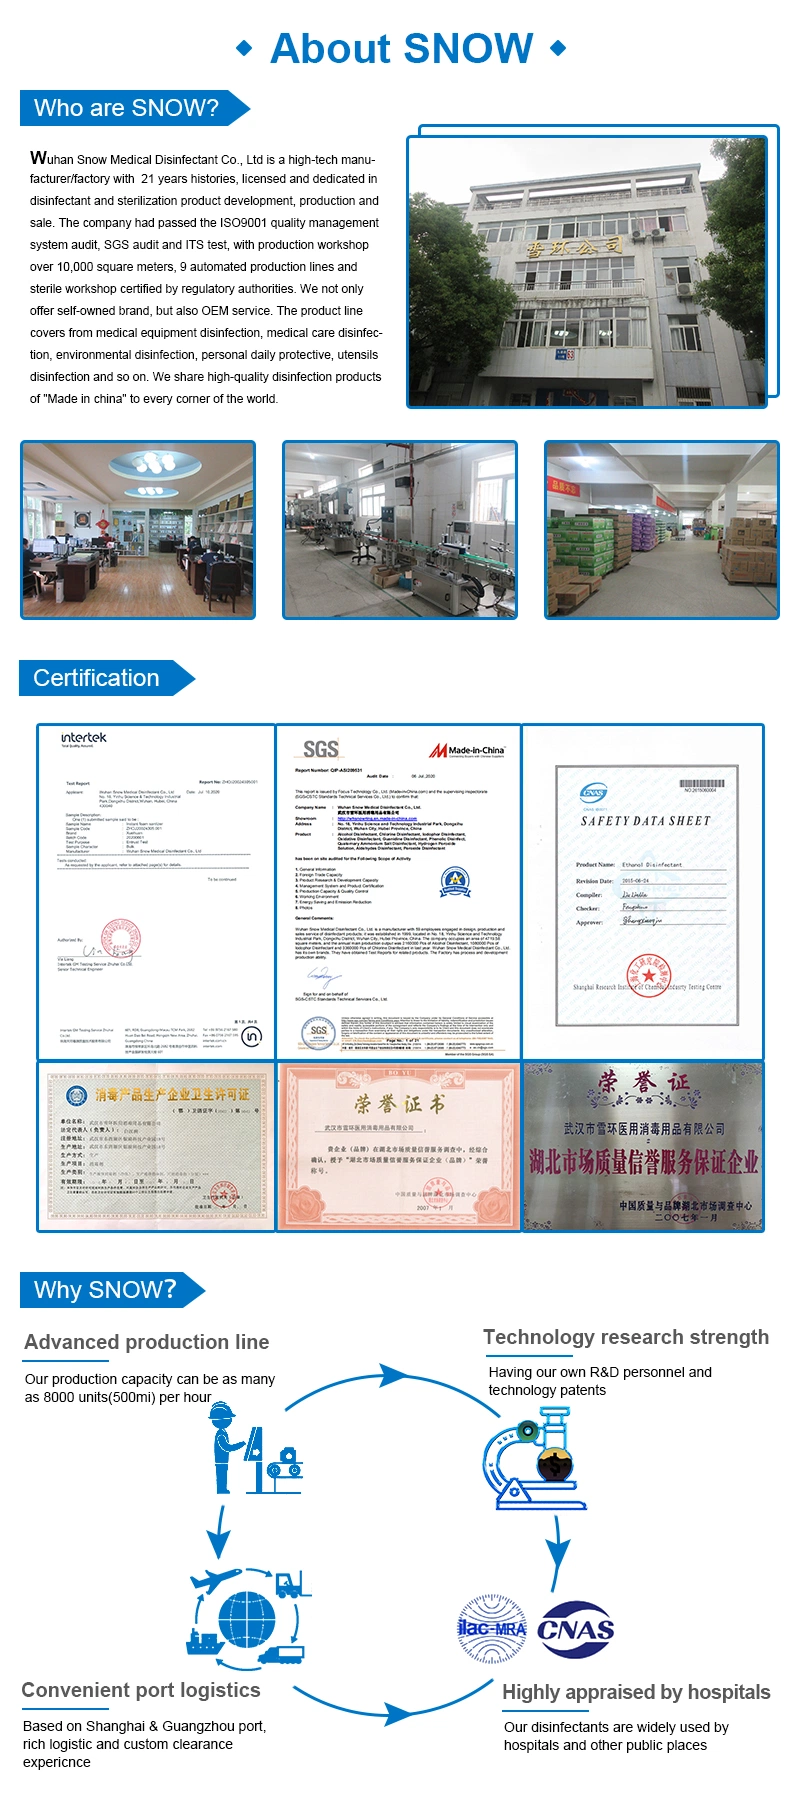 Ready to Ship Made in China Skin Disinfectant Iodophor 0.5 Solution